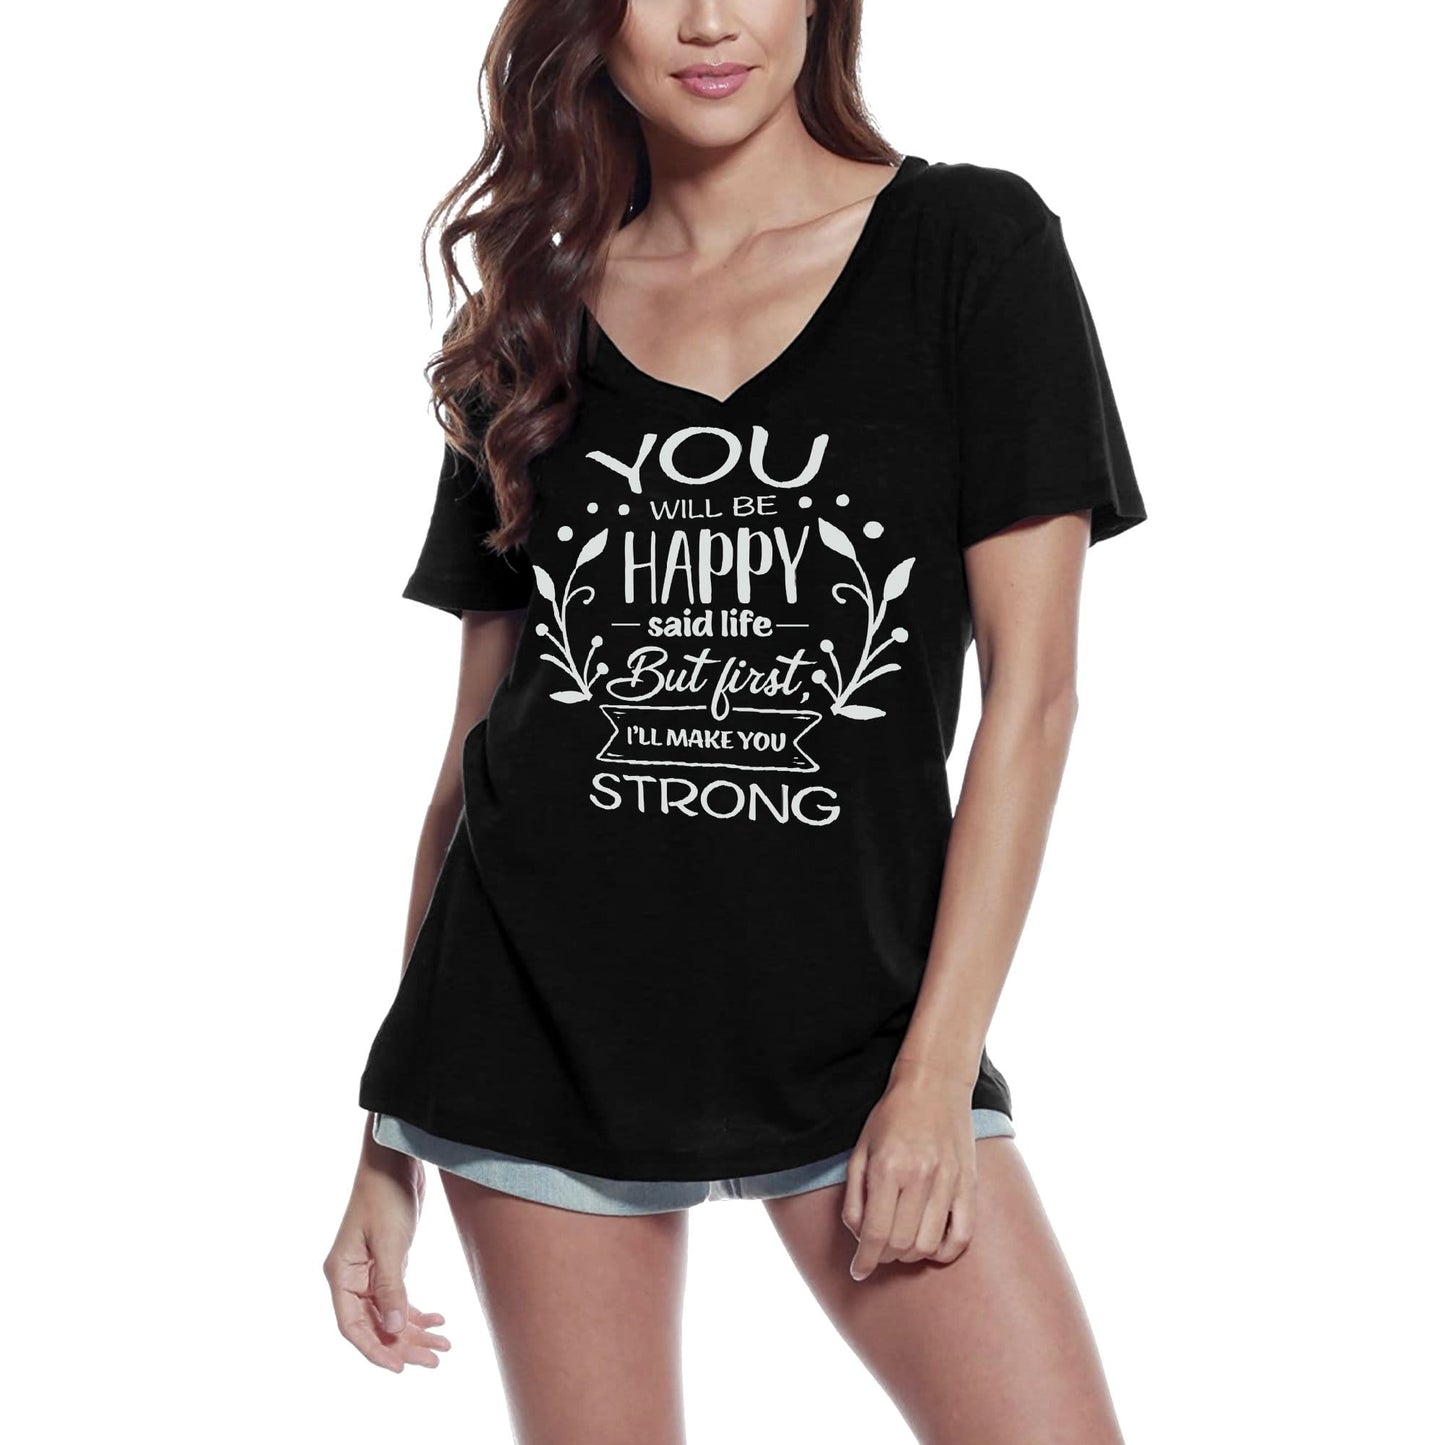 ULTRABASIC Women's T-Shirt You Will Be Happy Said Life - Motivational Life Quote